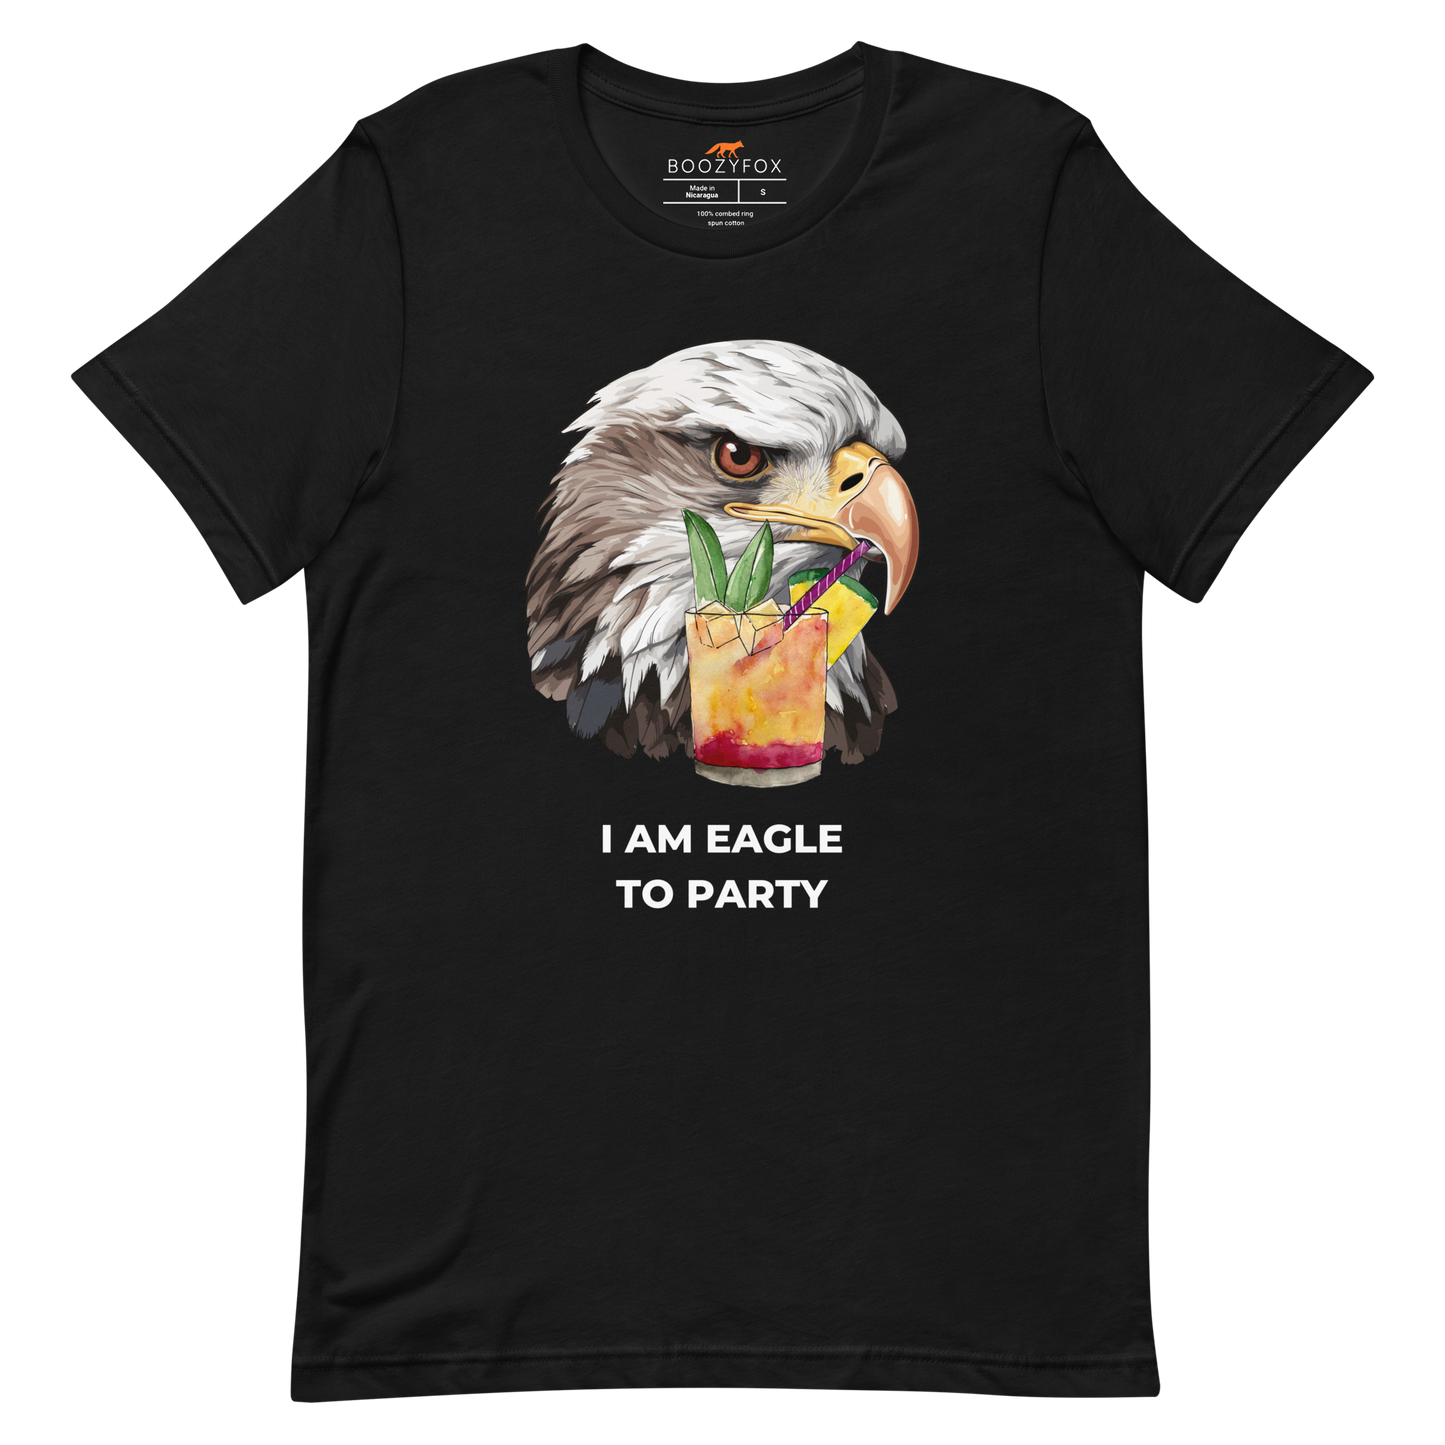 Black Premium Eagle T-Shirt featuring an eye-catching I Am Eagle to Party graphic on the chest - Funny Graphic Eagle Tees - Boozy Fox